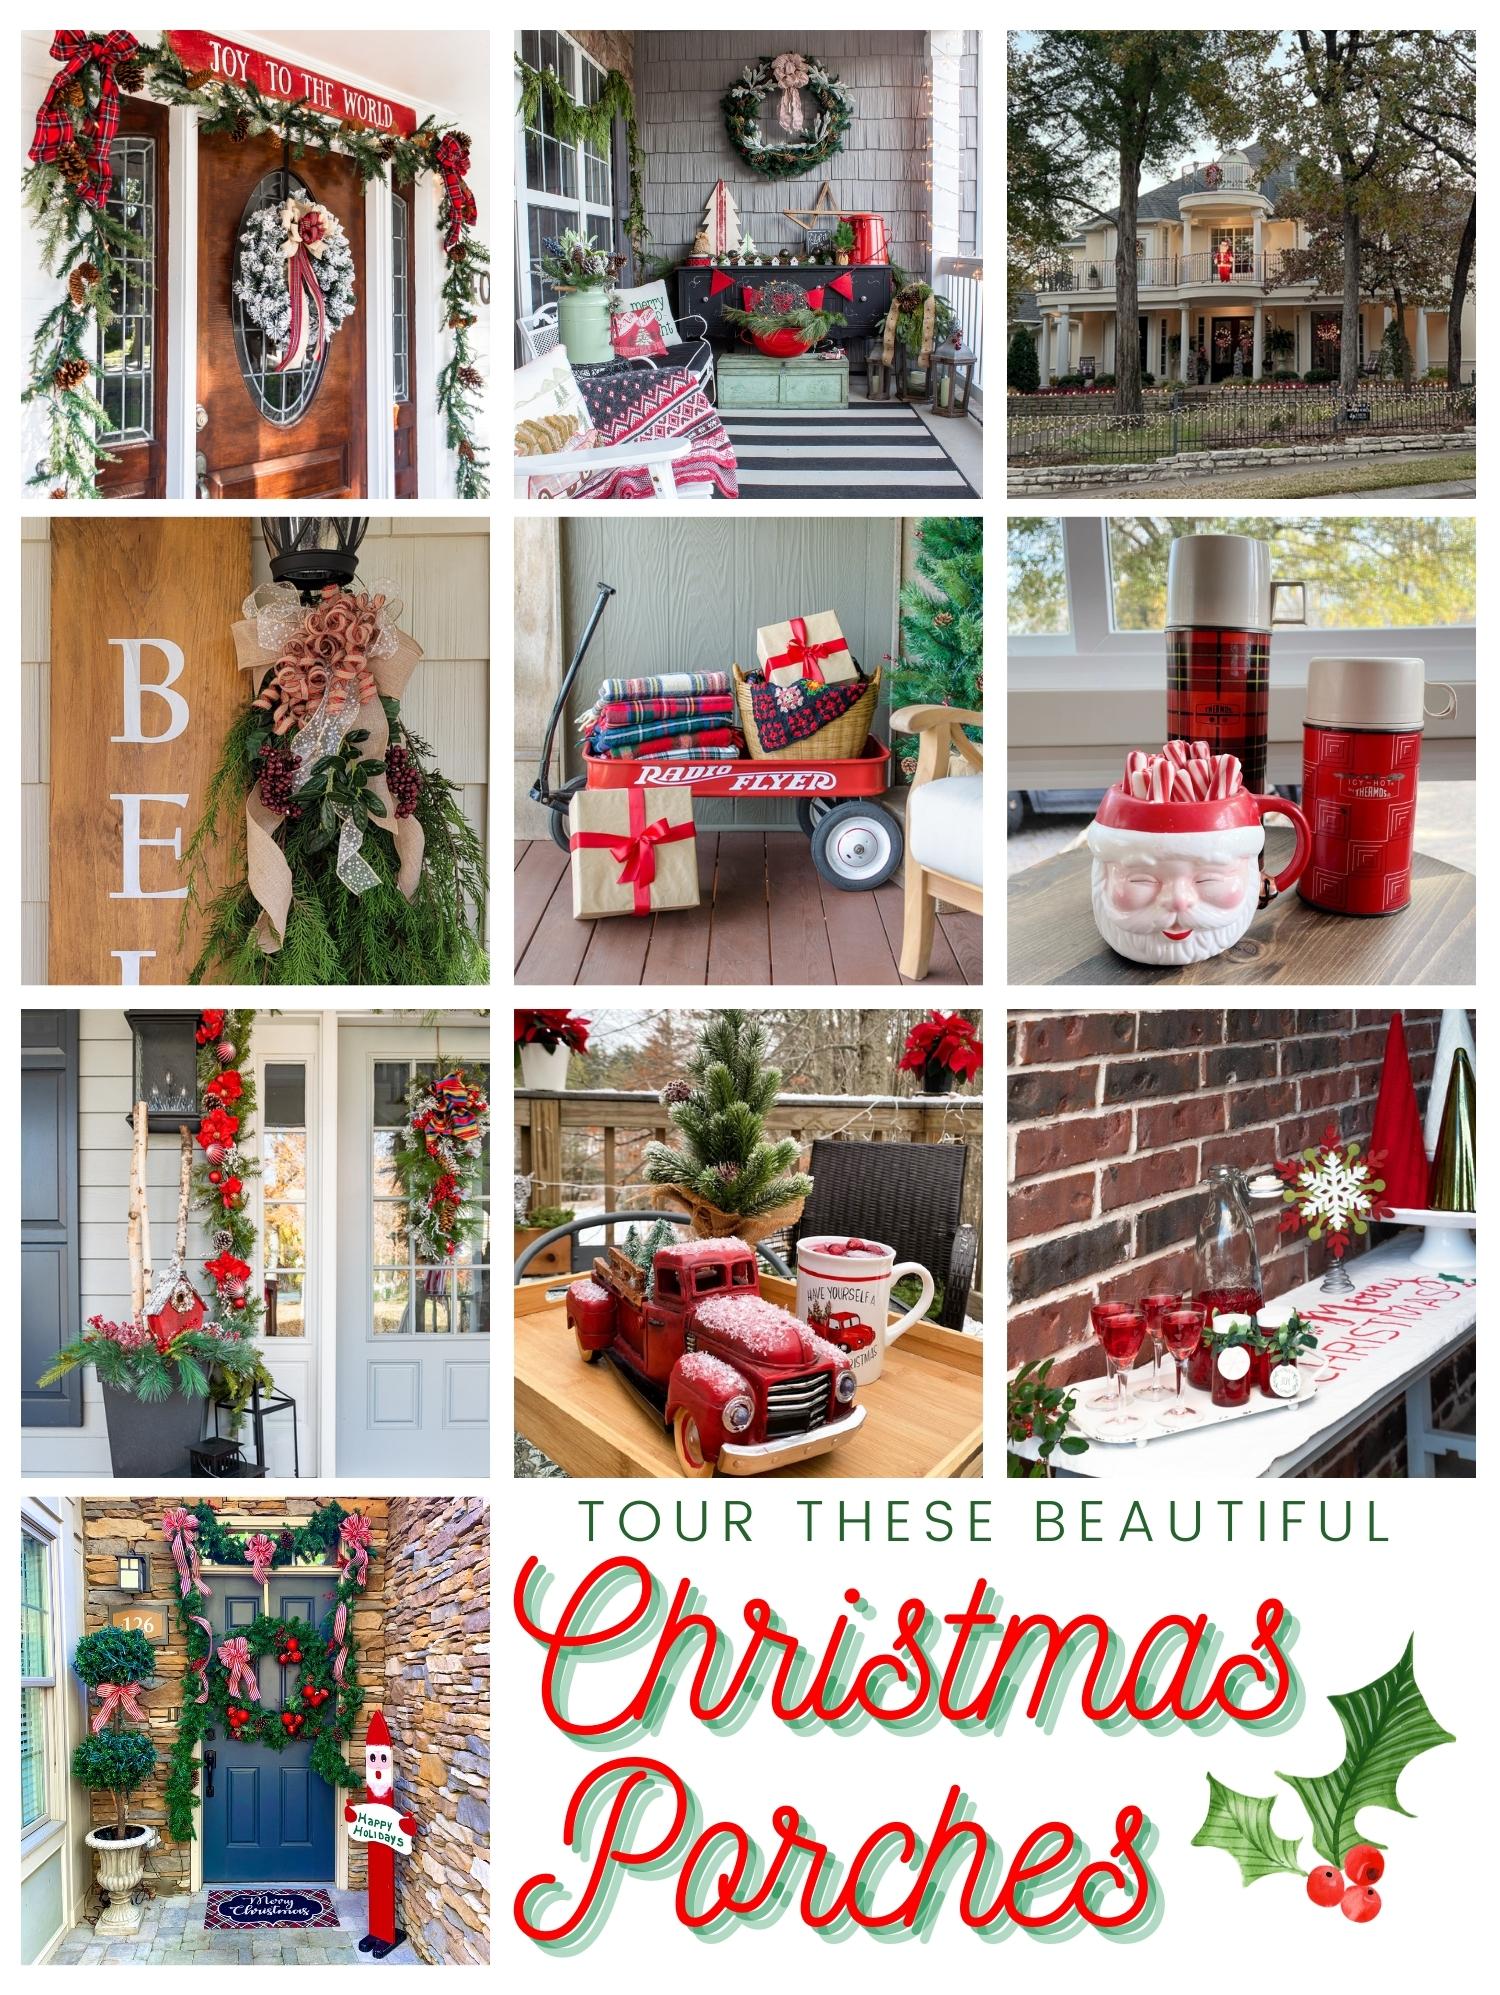 a collage image of 10 images of different home decor bloggers front porches decorated for Christmas. Text reads "tour these beautiful Christmas porches"